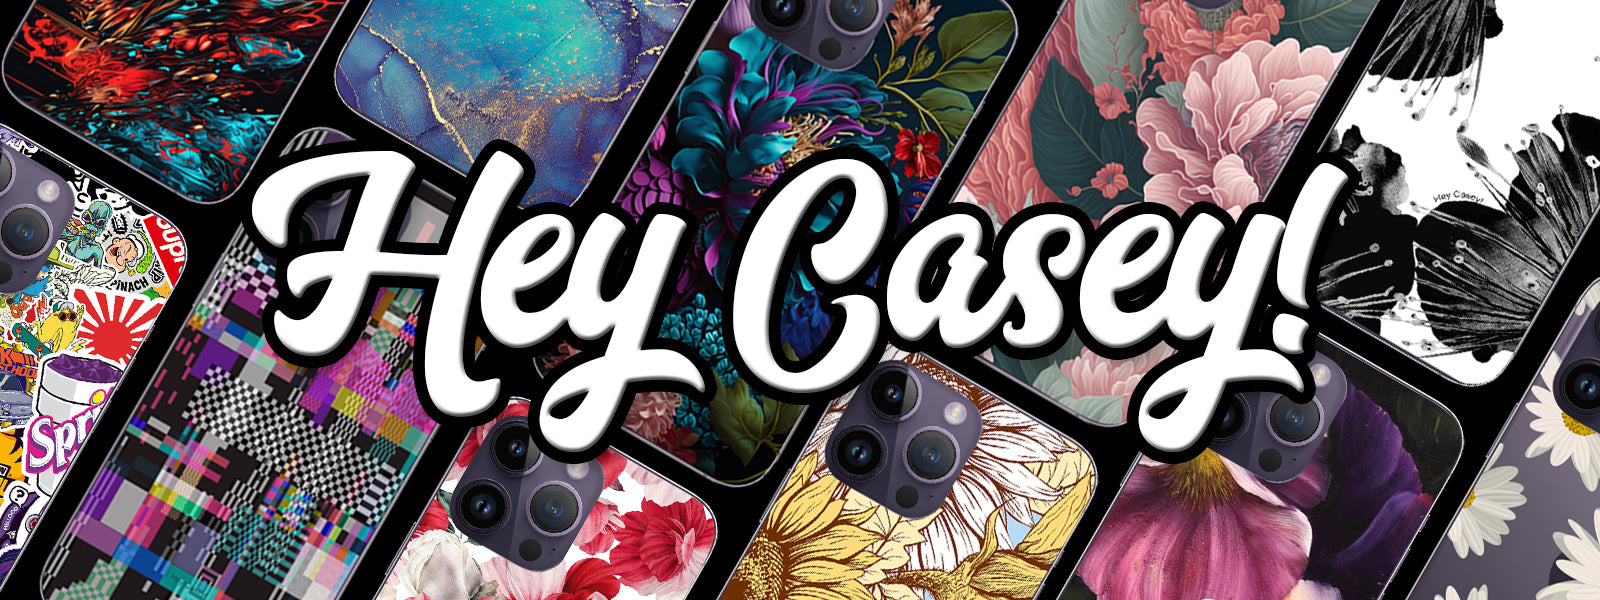 Hey Casey! Desk and phone accessories